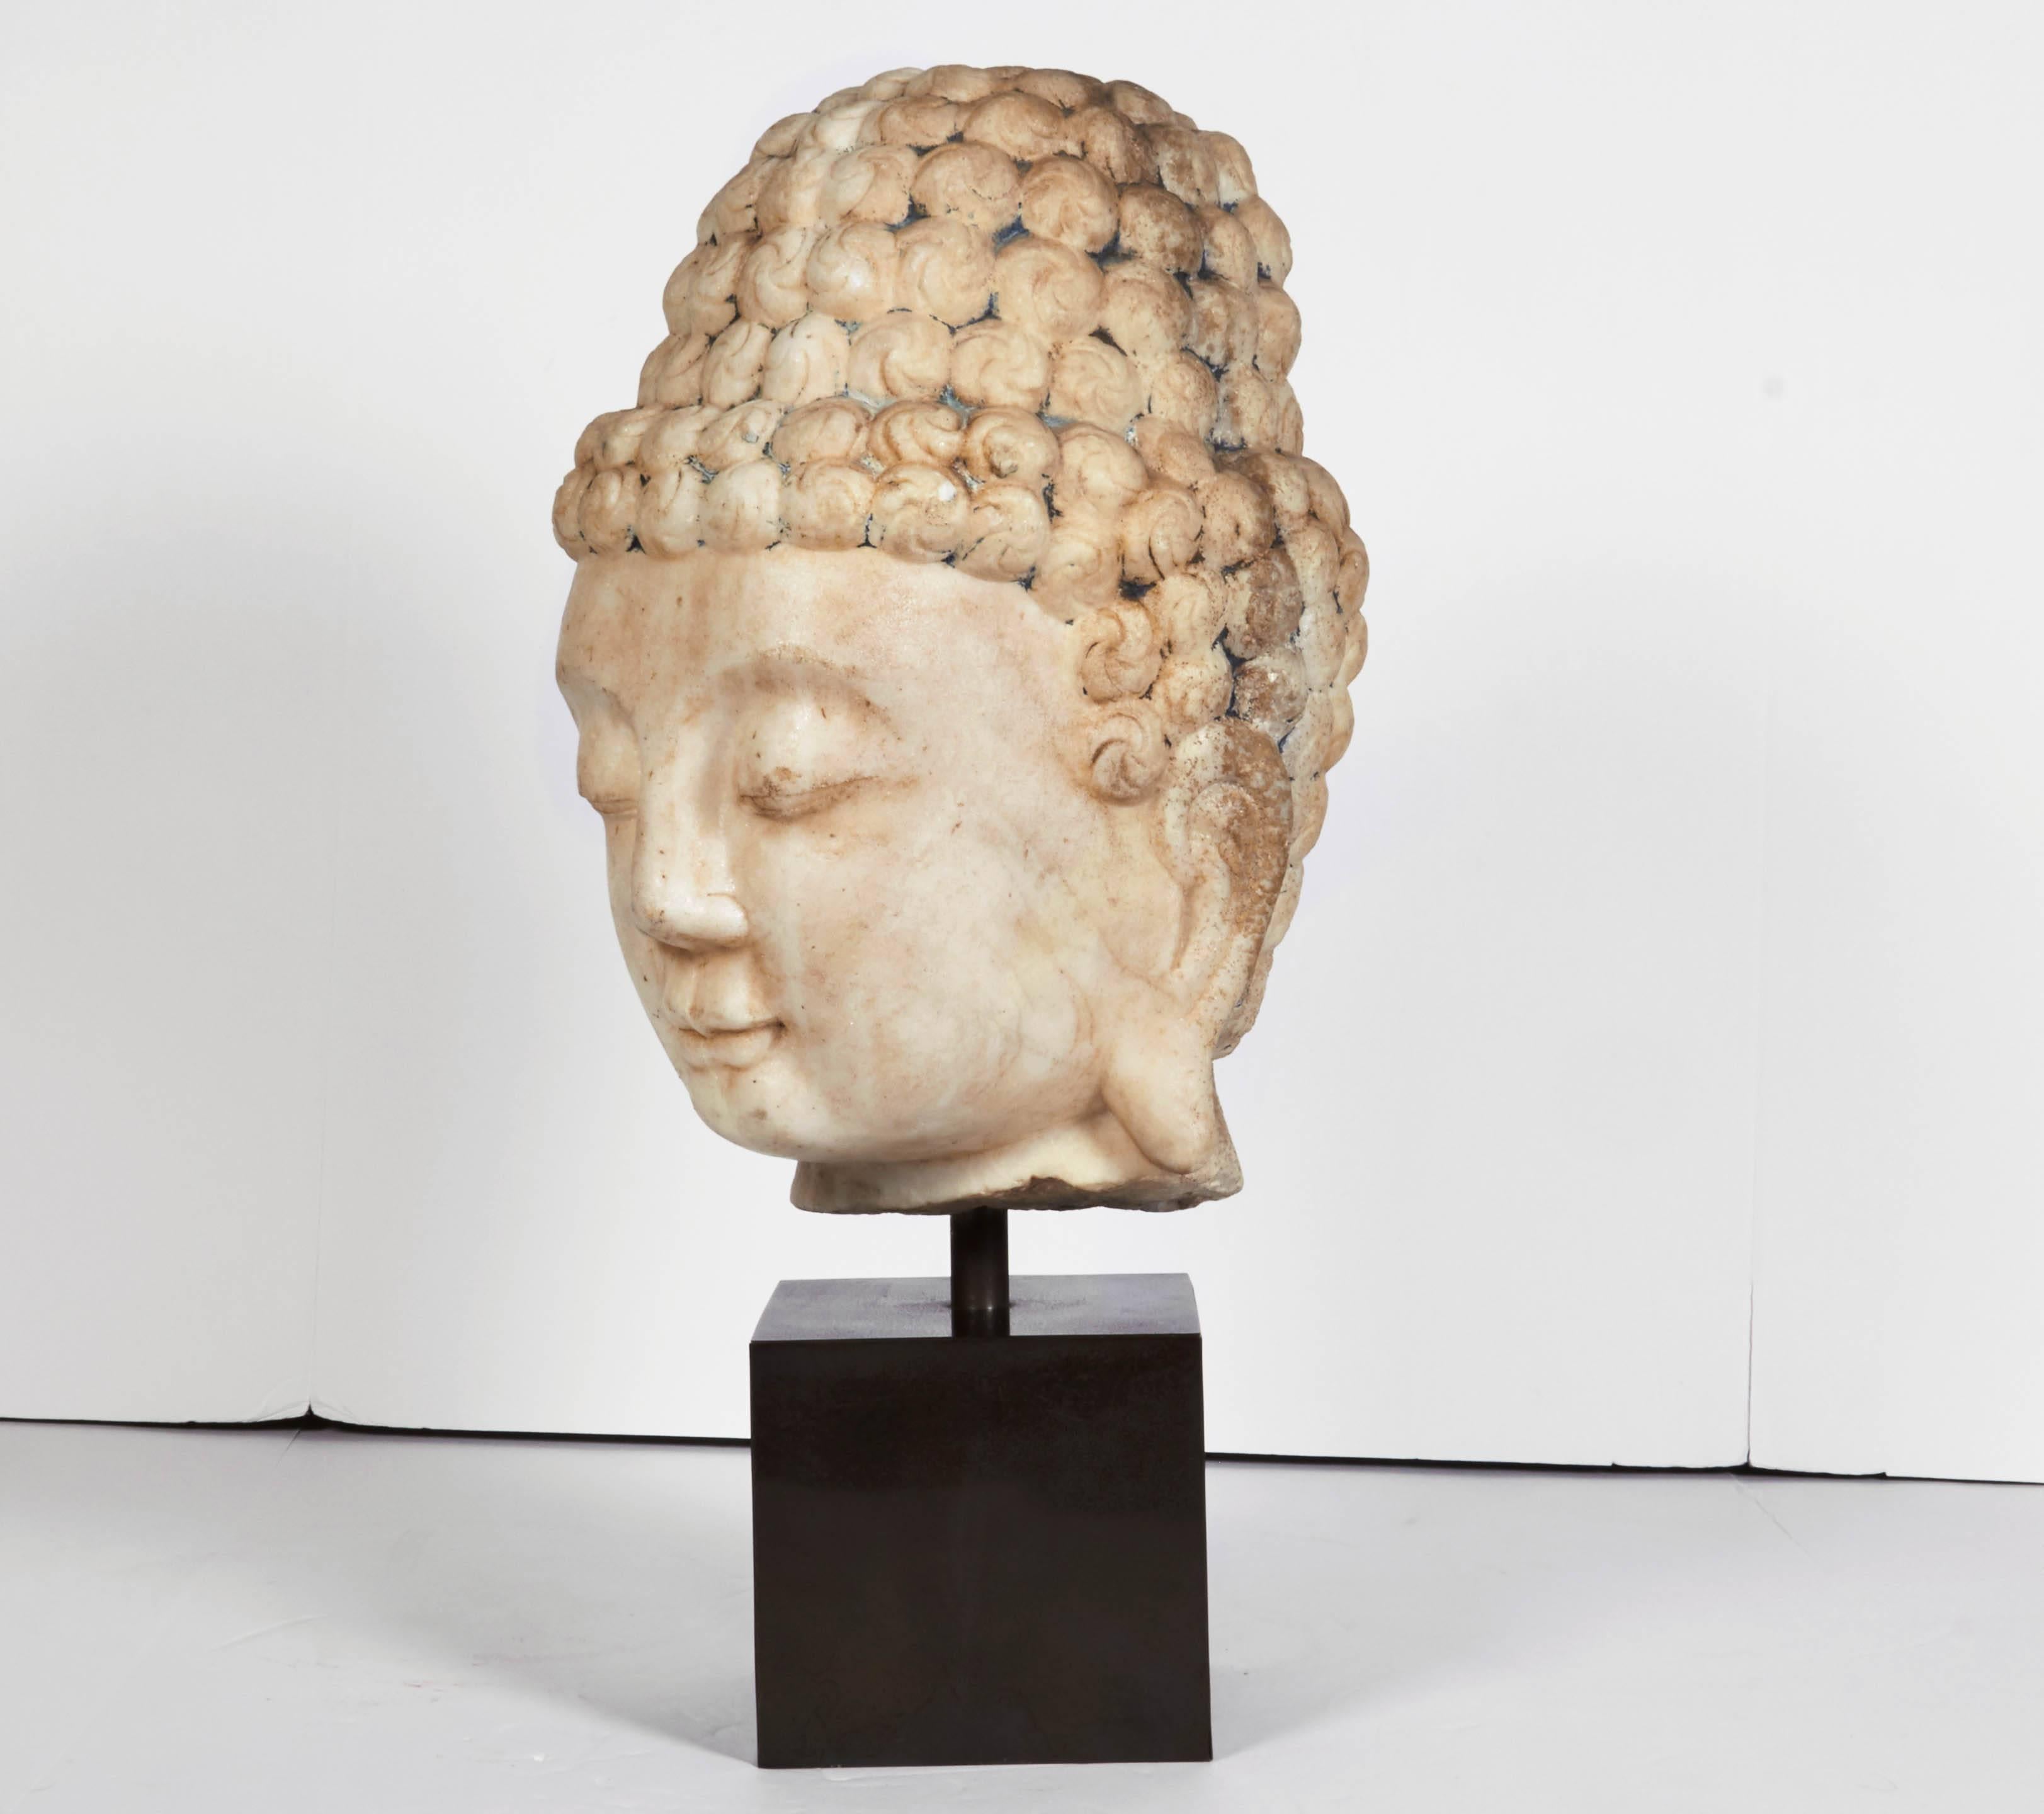 Hand-Carved White Stone Head of Buddha, Chinese, Ming Dynasty, '1368-1644'